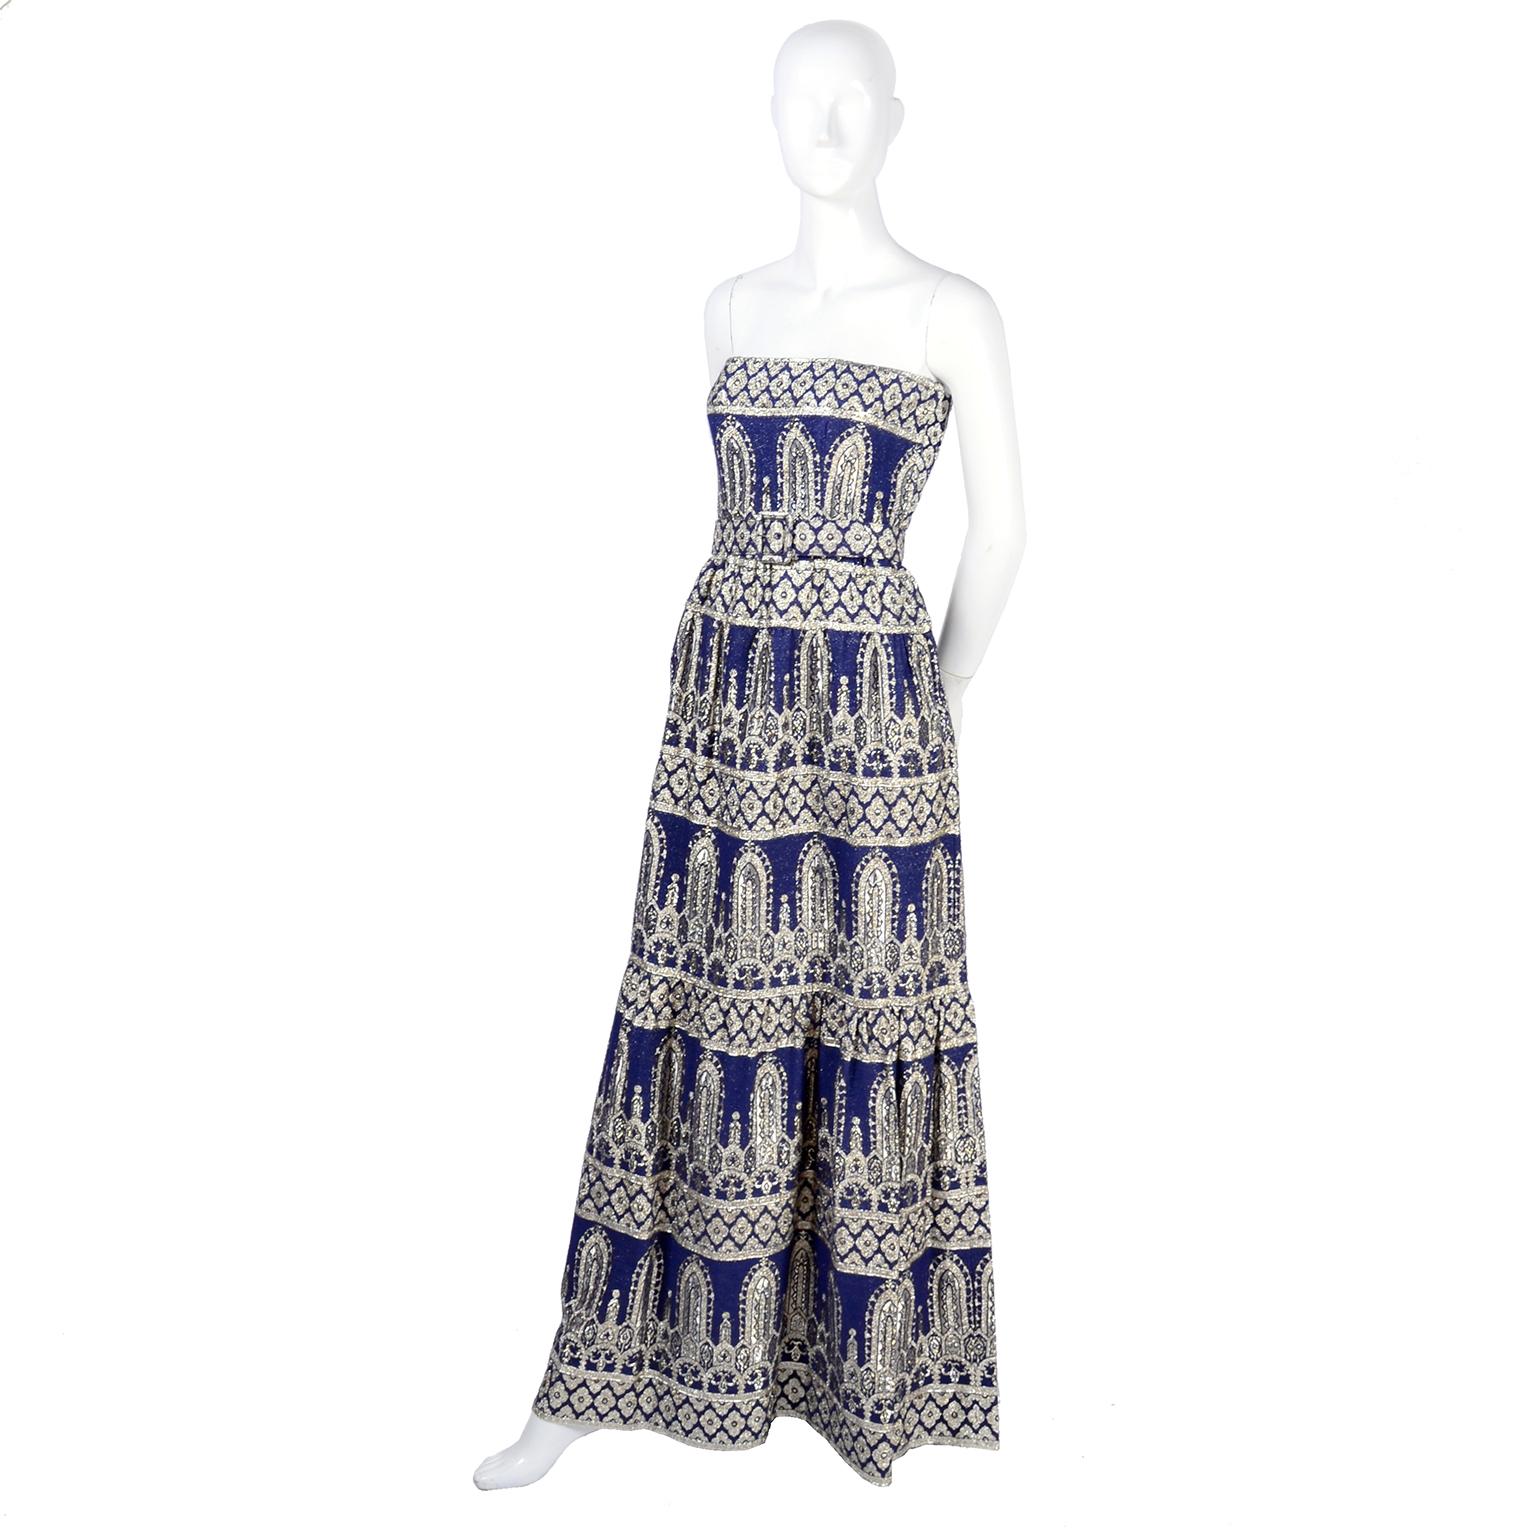 This is an absolutely gorgeous vintage Oscar de la Renta dress and jacket in blue with a metallic Byzantine pattern. This late 1960's or early 1970's 2 piece evening ensemble includes a strapless evening gown and a matching jacket.  The dress has a